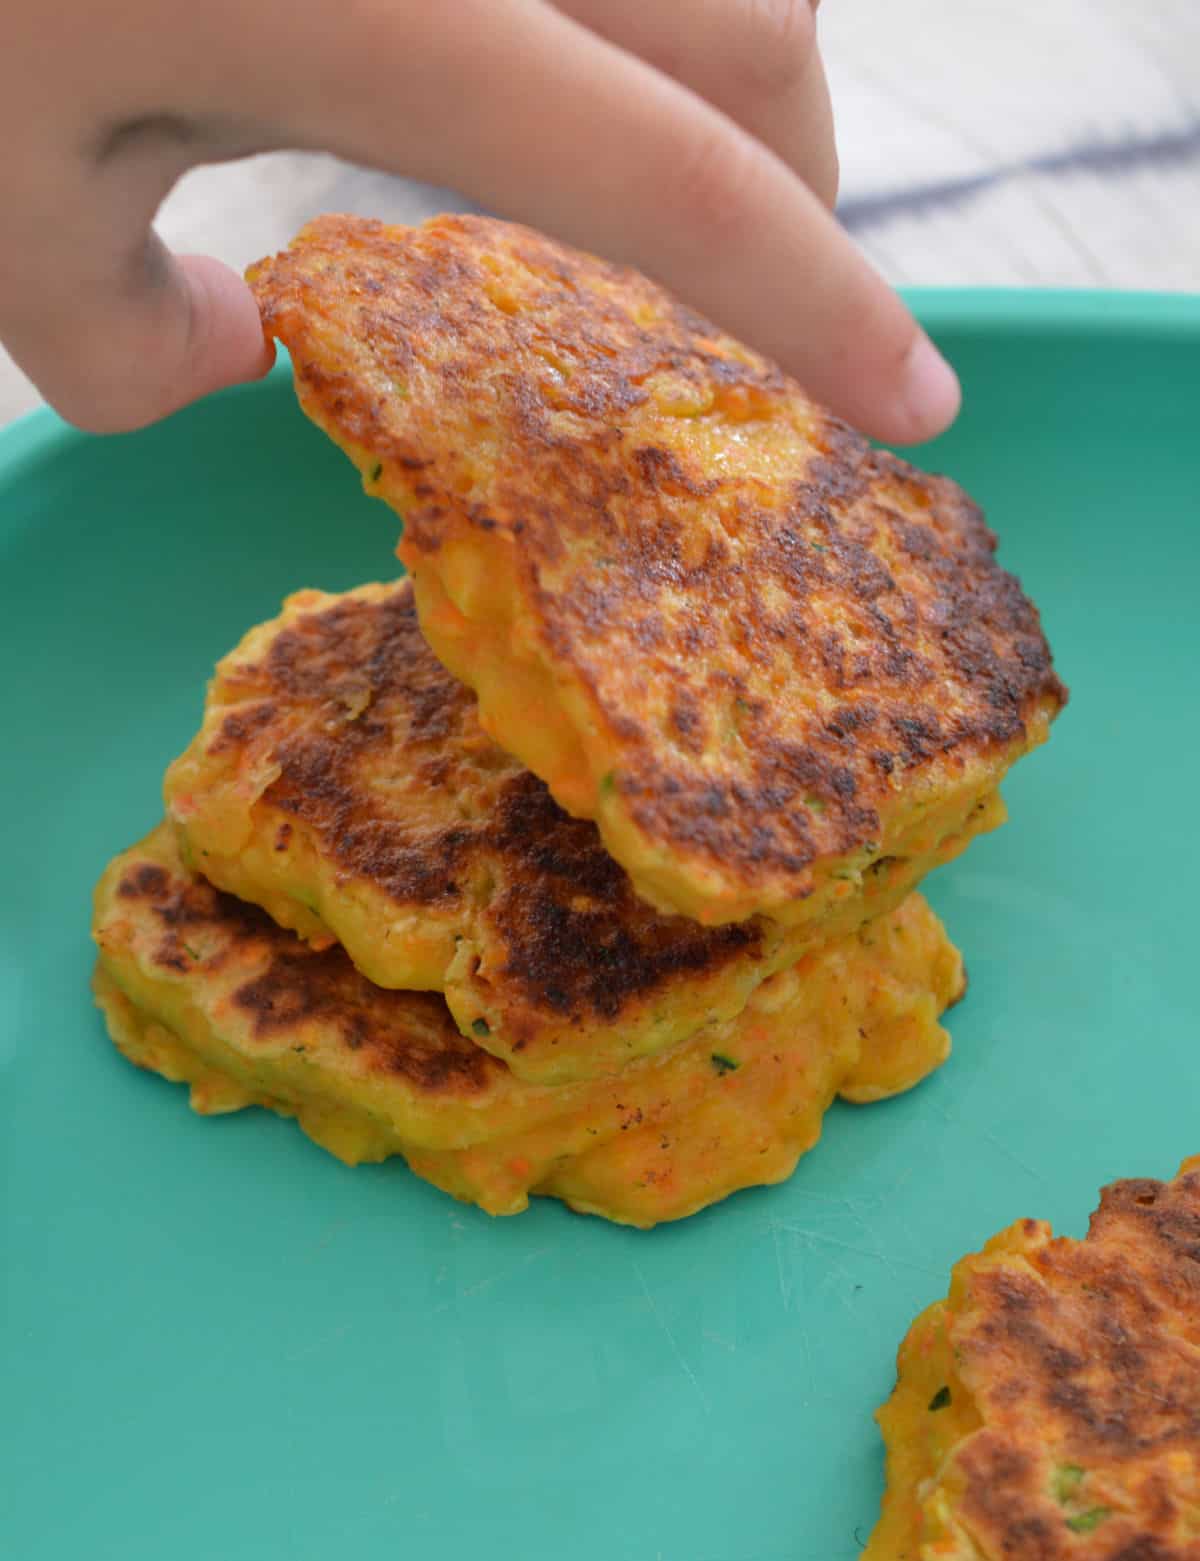 Child's hand reaching for a sweet potato fritter sitting on an aqua plate.